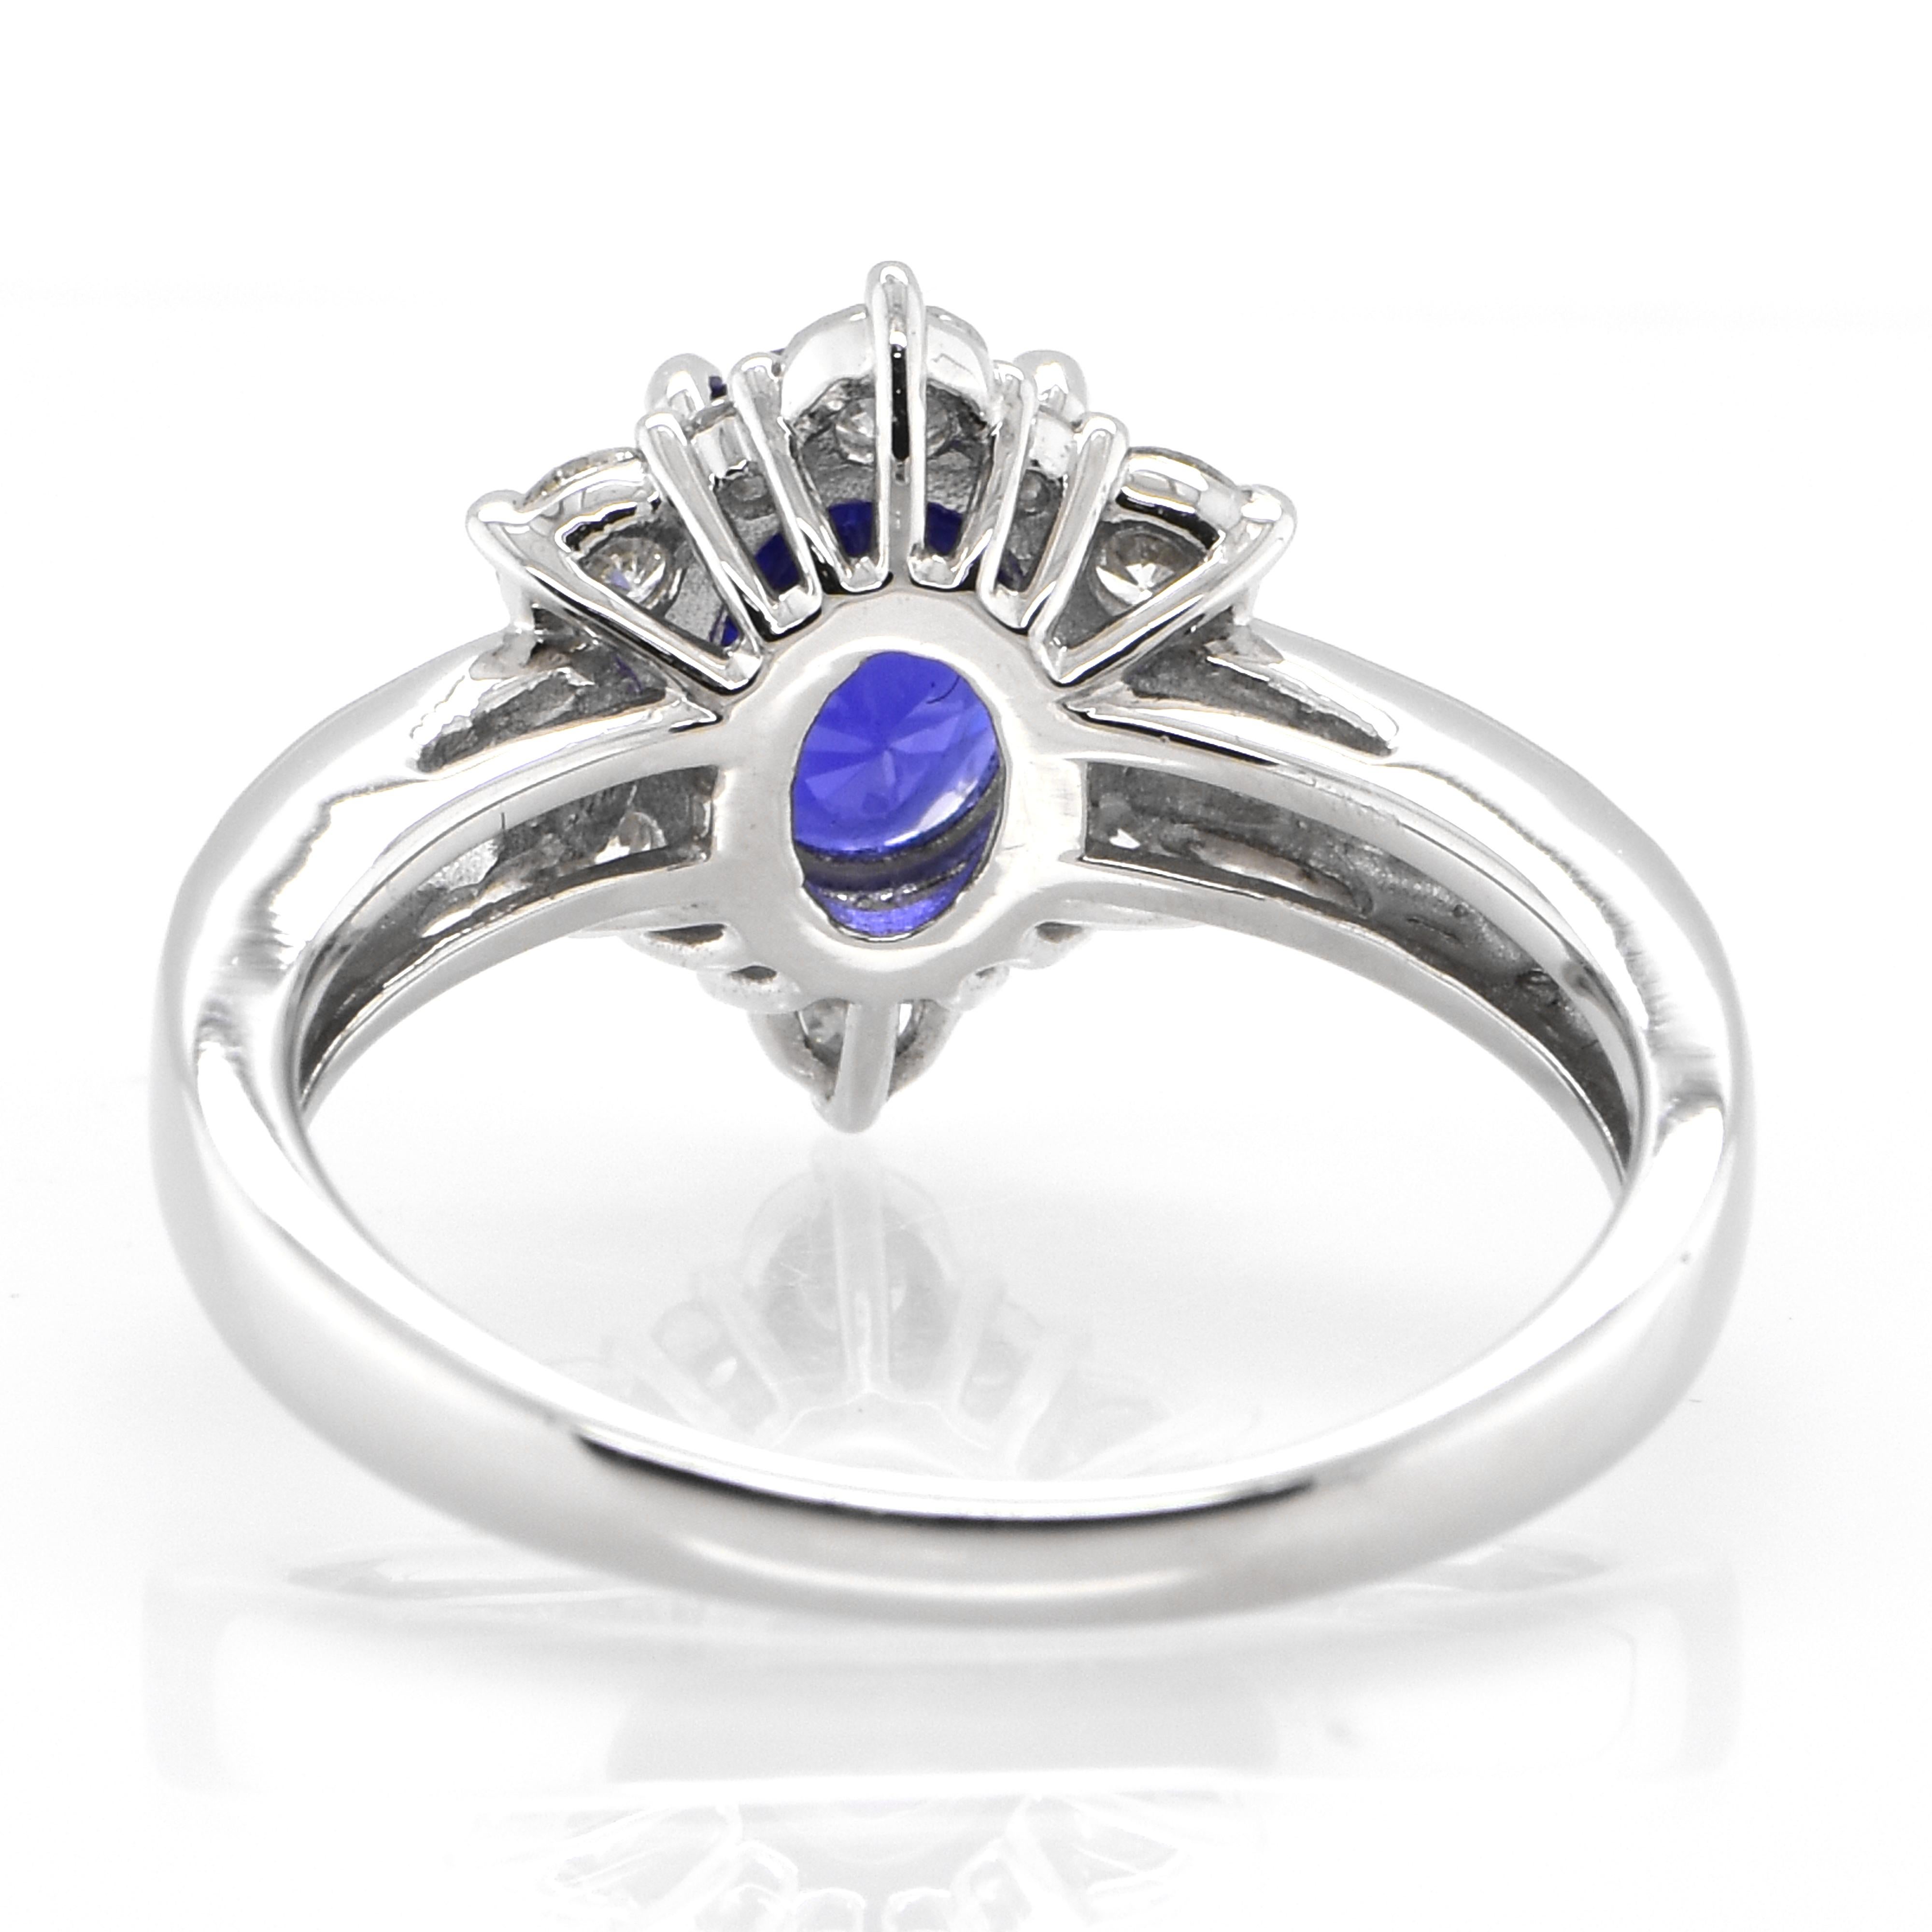 Women's GIA Certified 2.02 Carat, Color-Change Sapphire and Diamond Ring set in Platinum For Sale